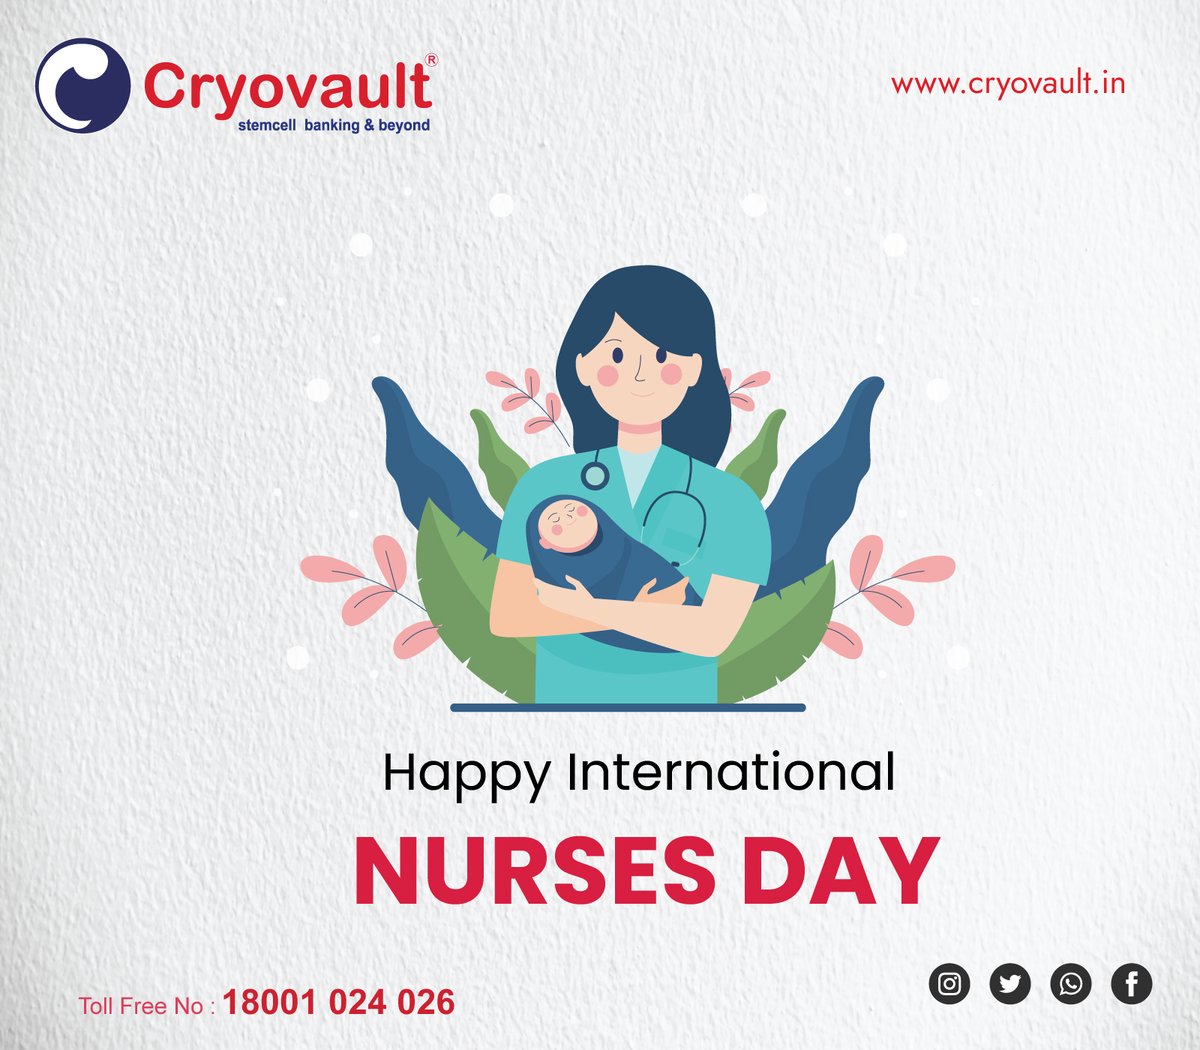 Happy International Nurses Day.....:)
Call Now:- 18001024026
Visit:- cryovault.in
#cryovault #cordblood #stemcellbanking #stemcelltreatment #stemcellbanking #india #savestemcellsafterbirth #largeststemcell #cordbloodstemcells